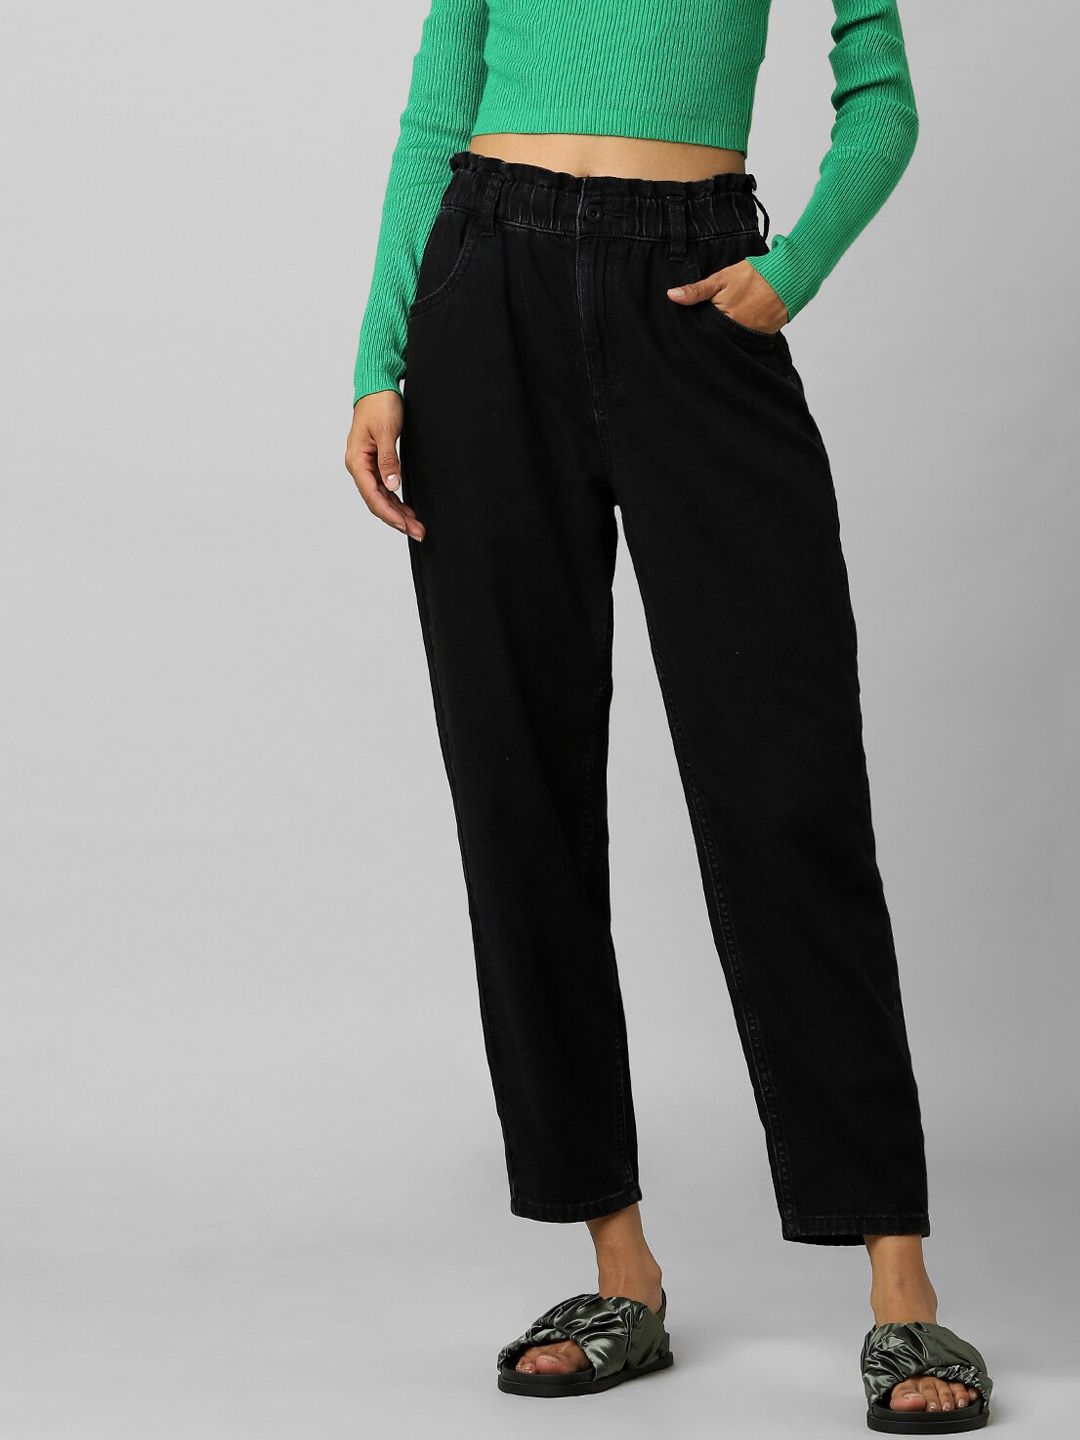 ONLY Women Black High-Rise Jeans Price in India